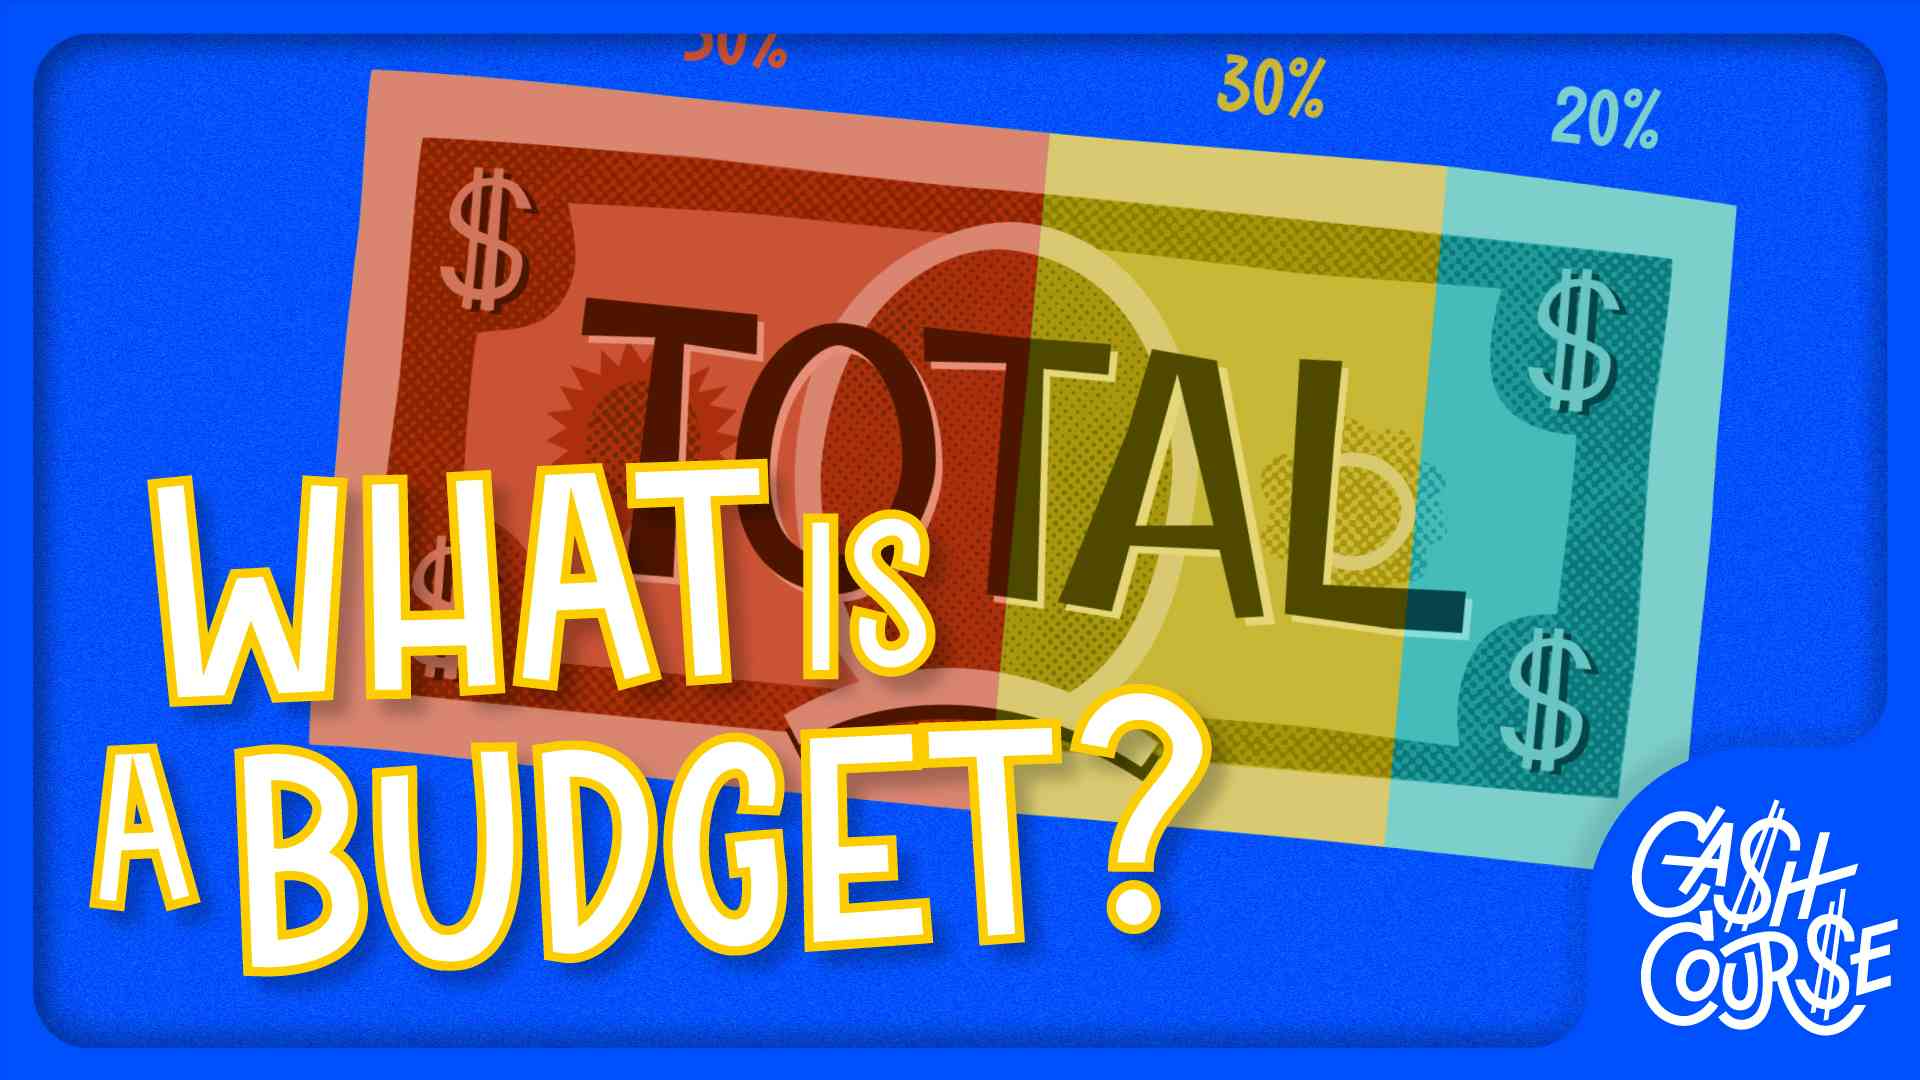 What Is a Budget?